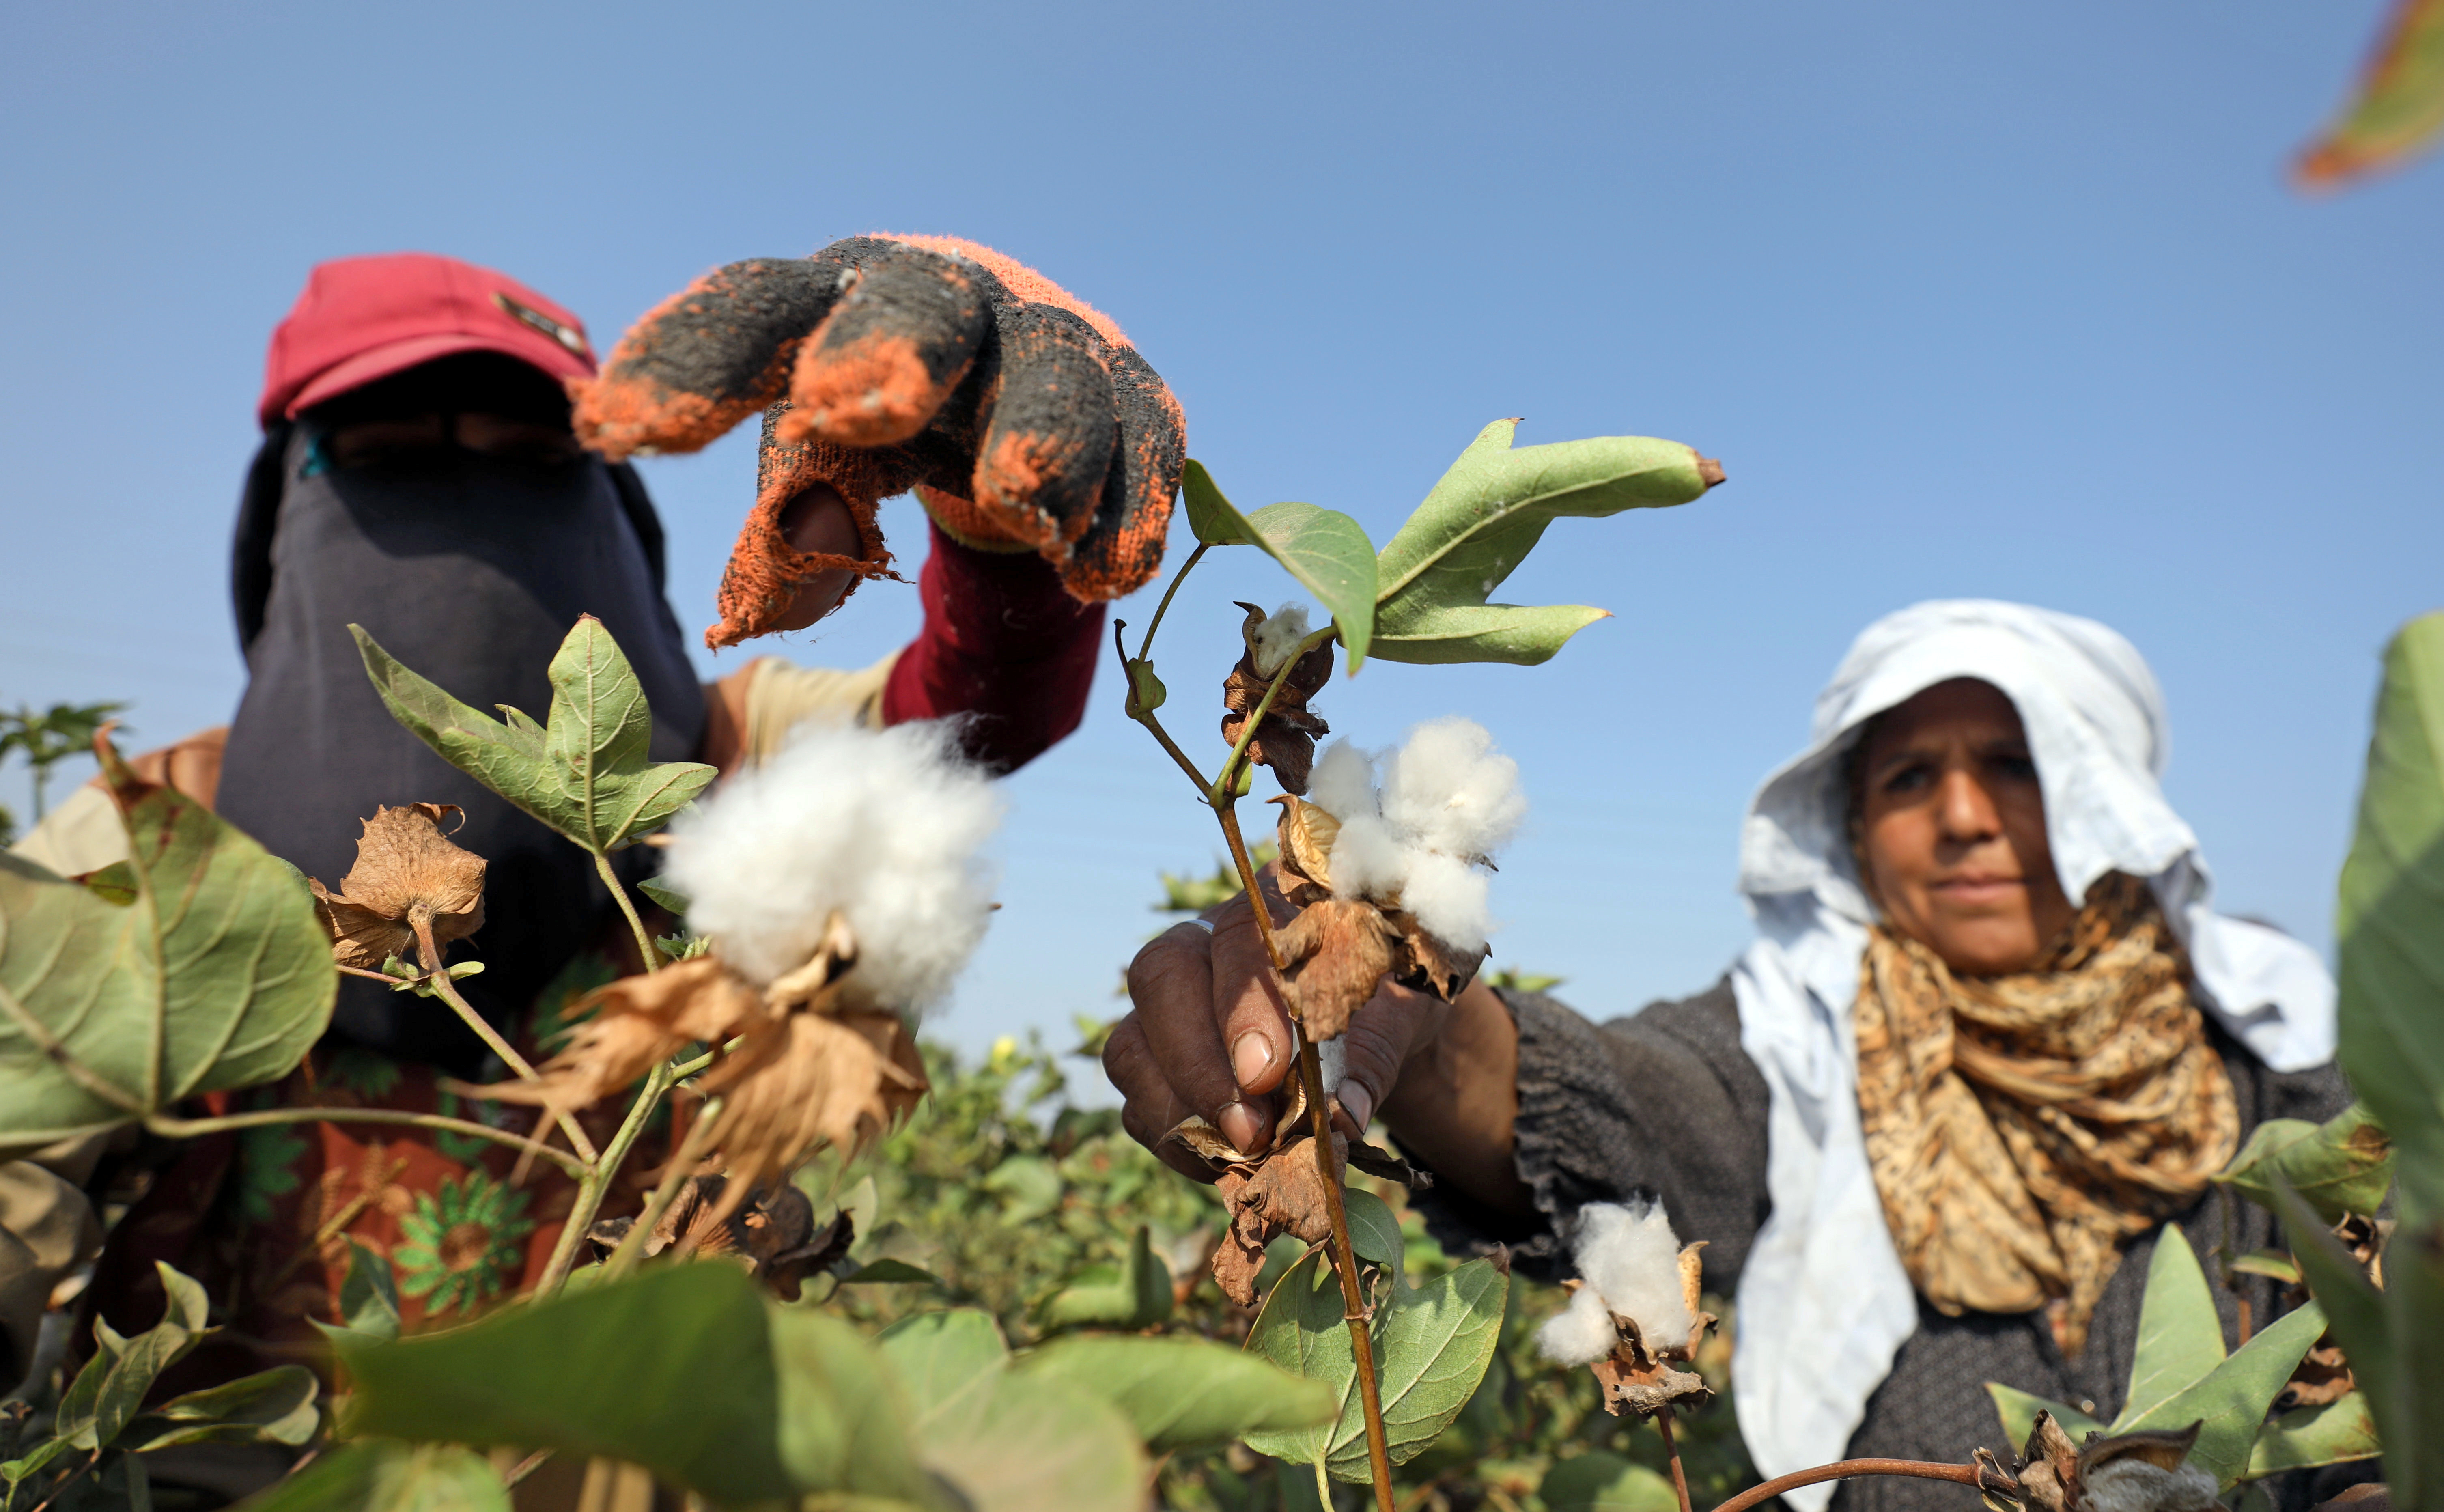 Can the cotton industry protect its workforce in a changing